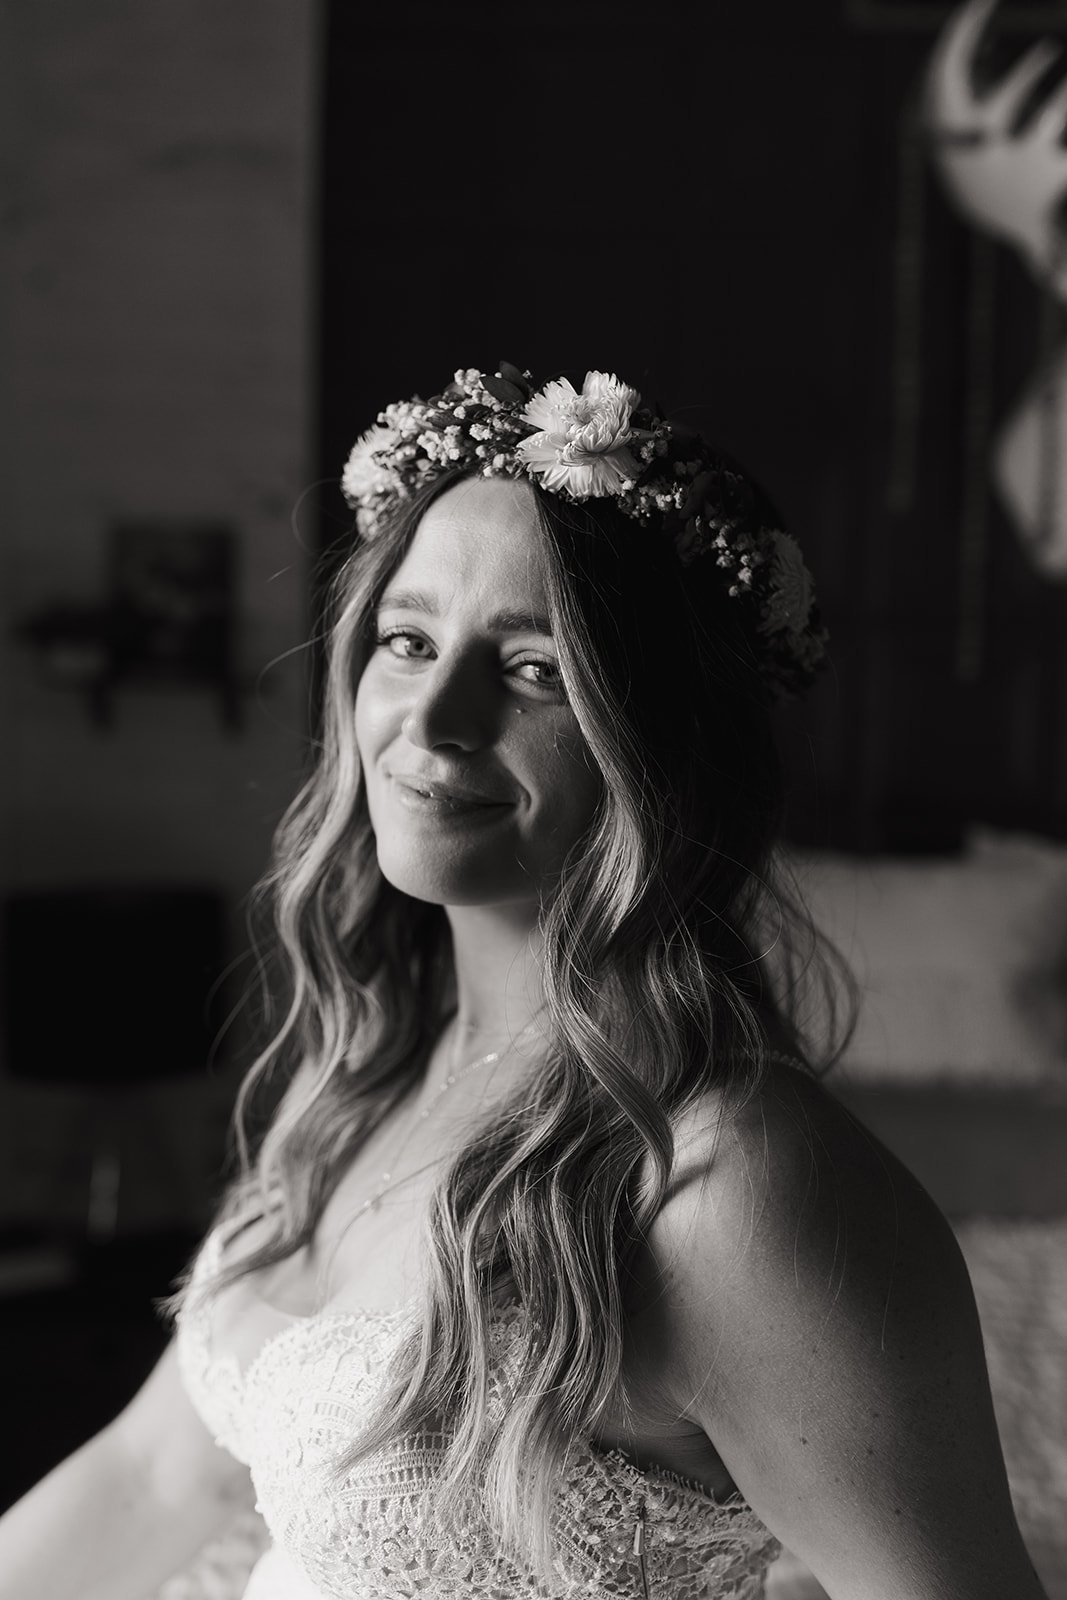 A black and white portrait of Leah getting ready